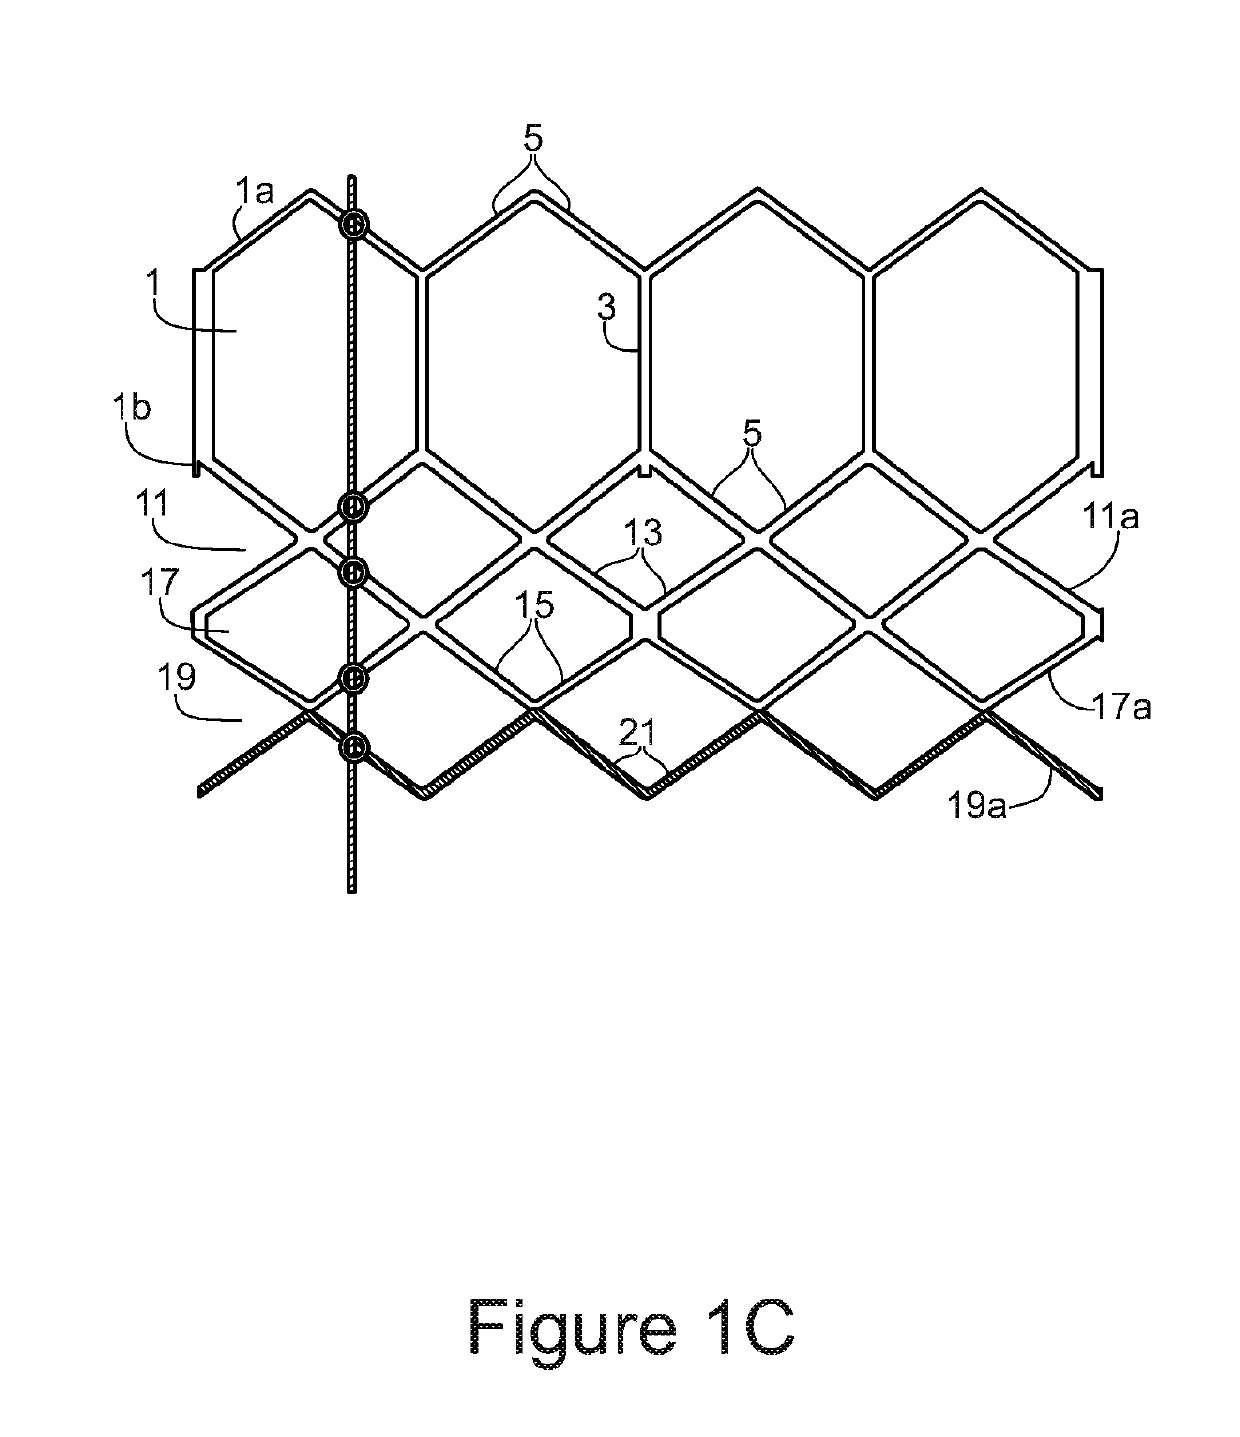 A frame for an implantable medical device and a method of manufacturing a frame for an implantable medical device